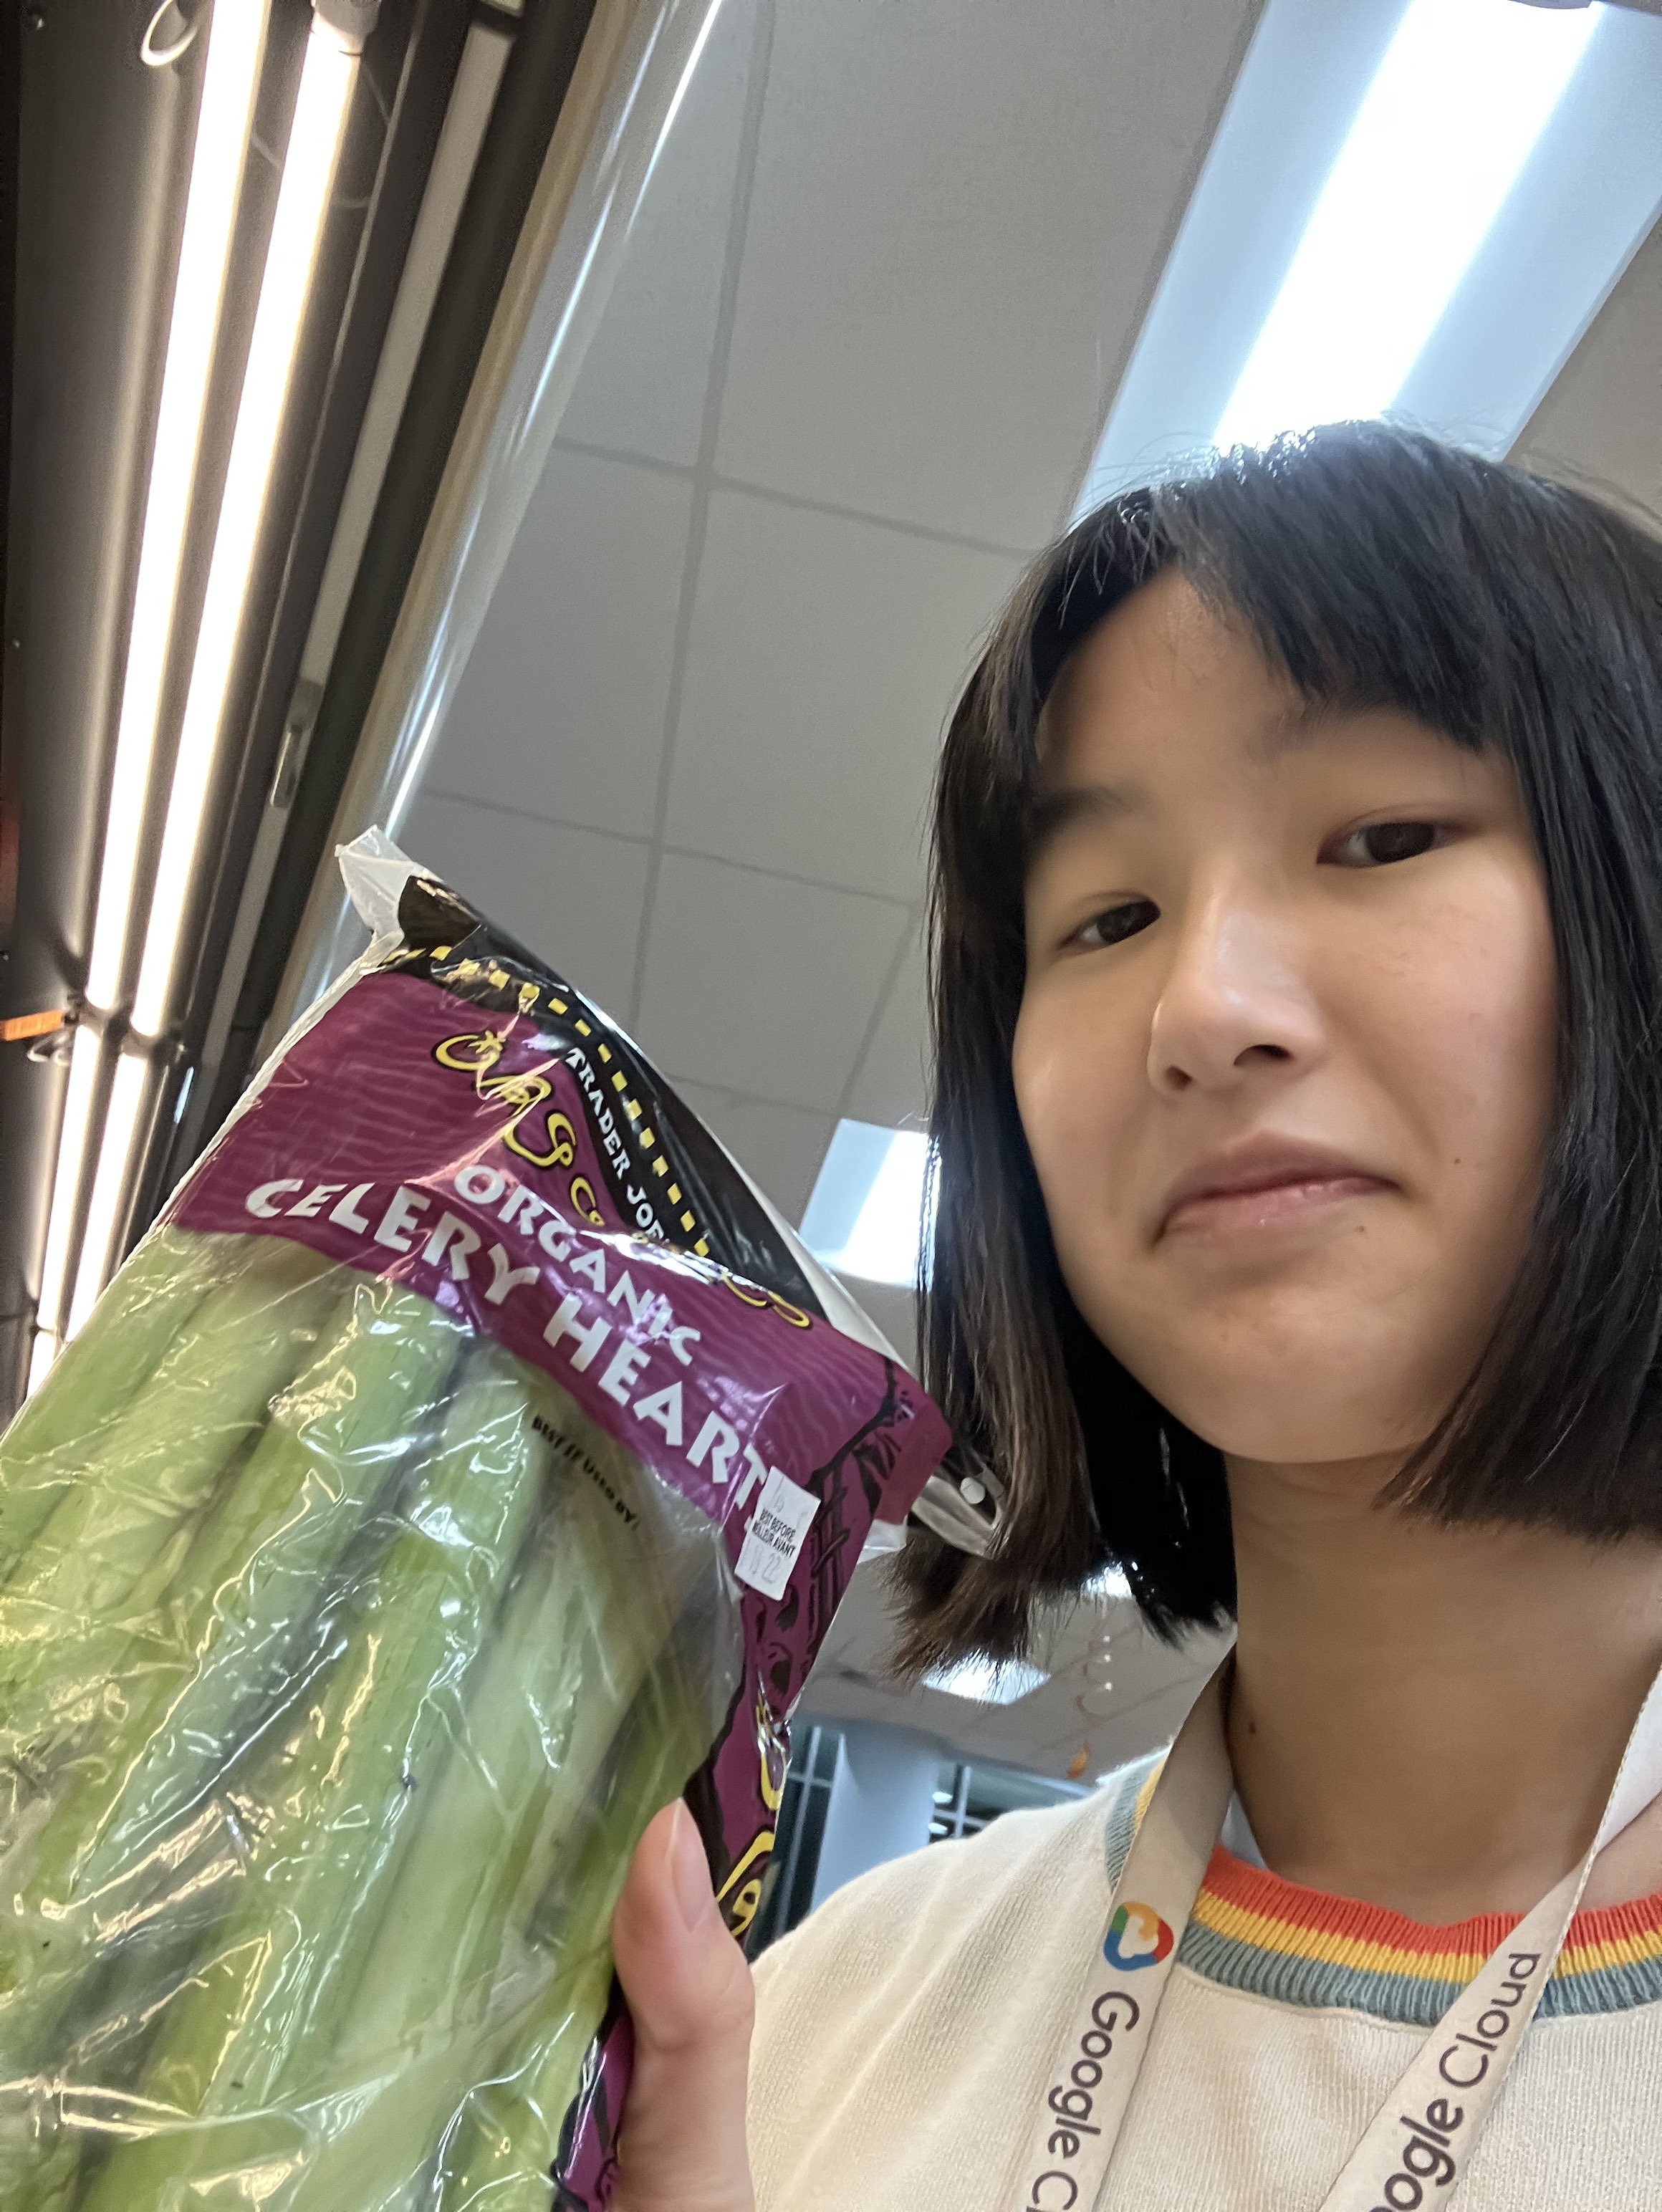 Dani holds celery with a disgruntled look on their face